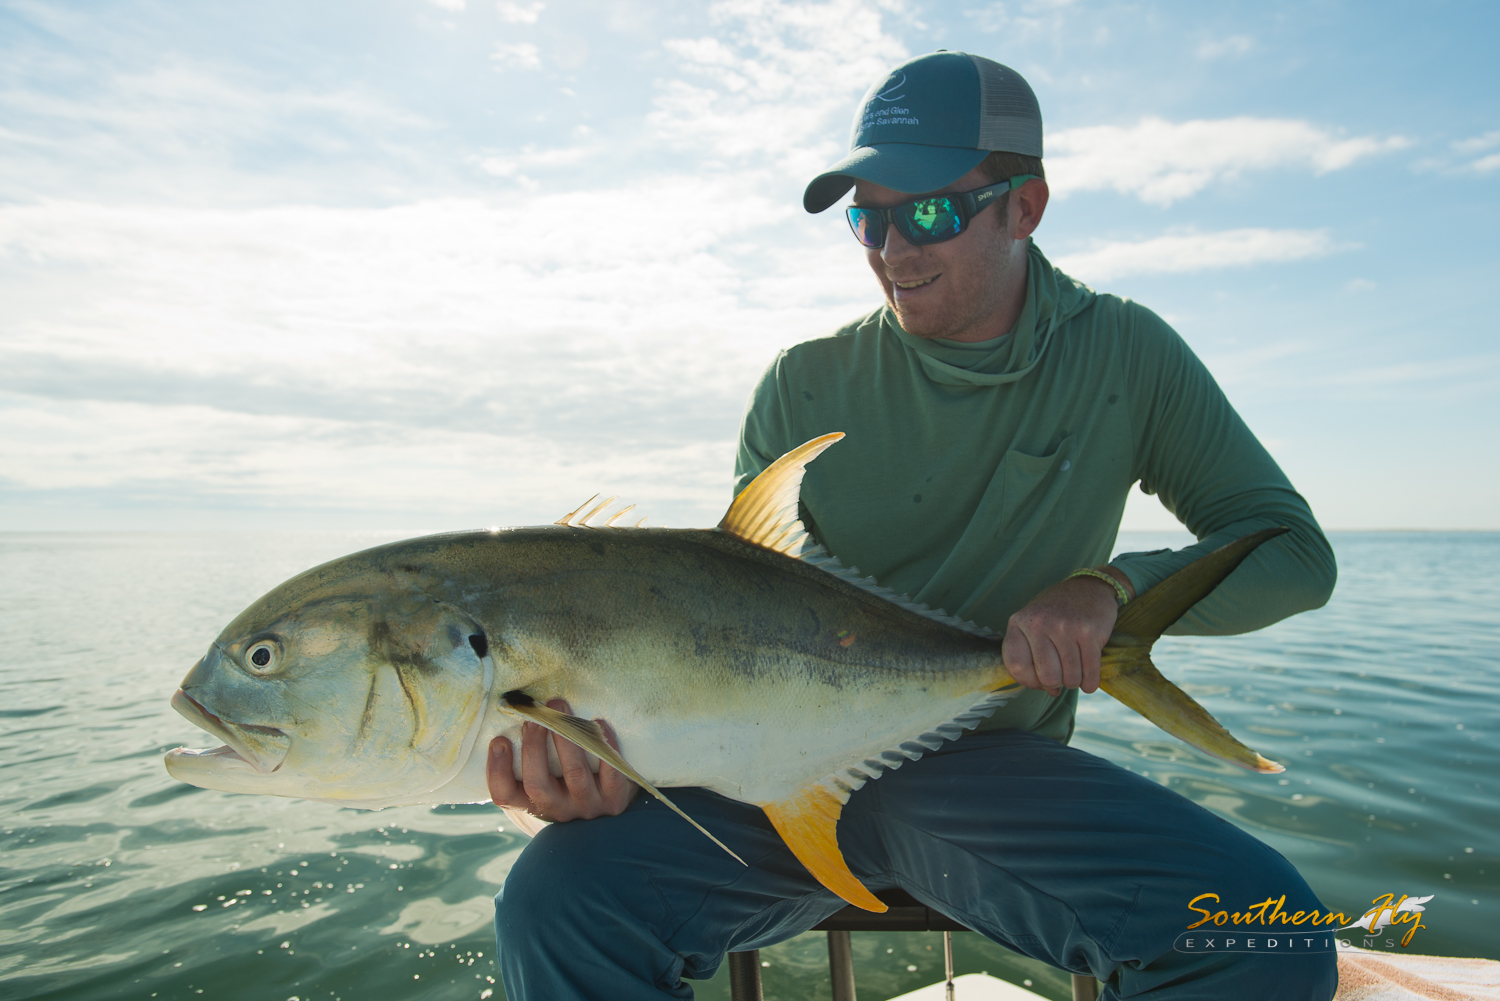 Top Spin Fishing Guide Hopedale Southern Fly Expeditions